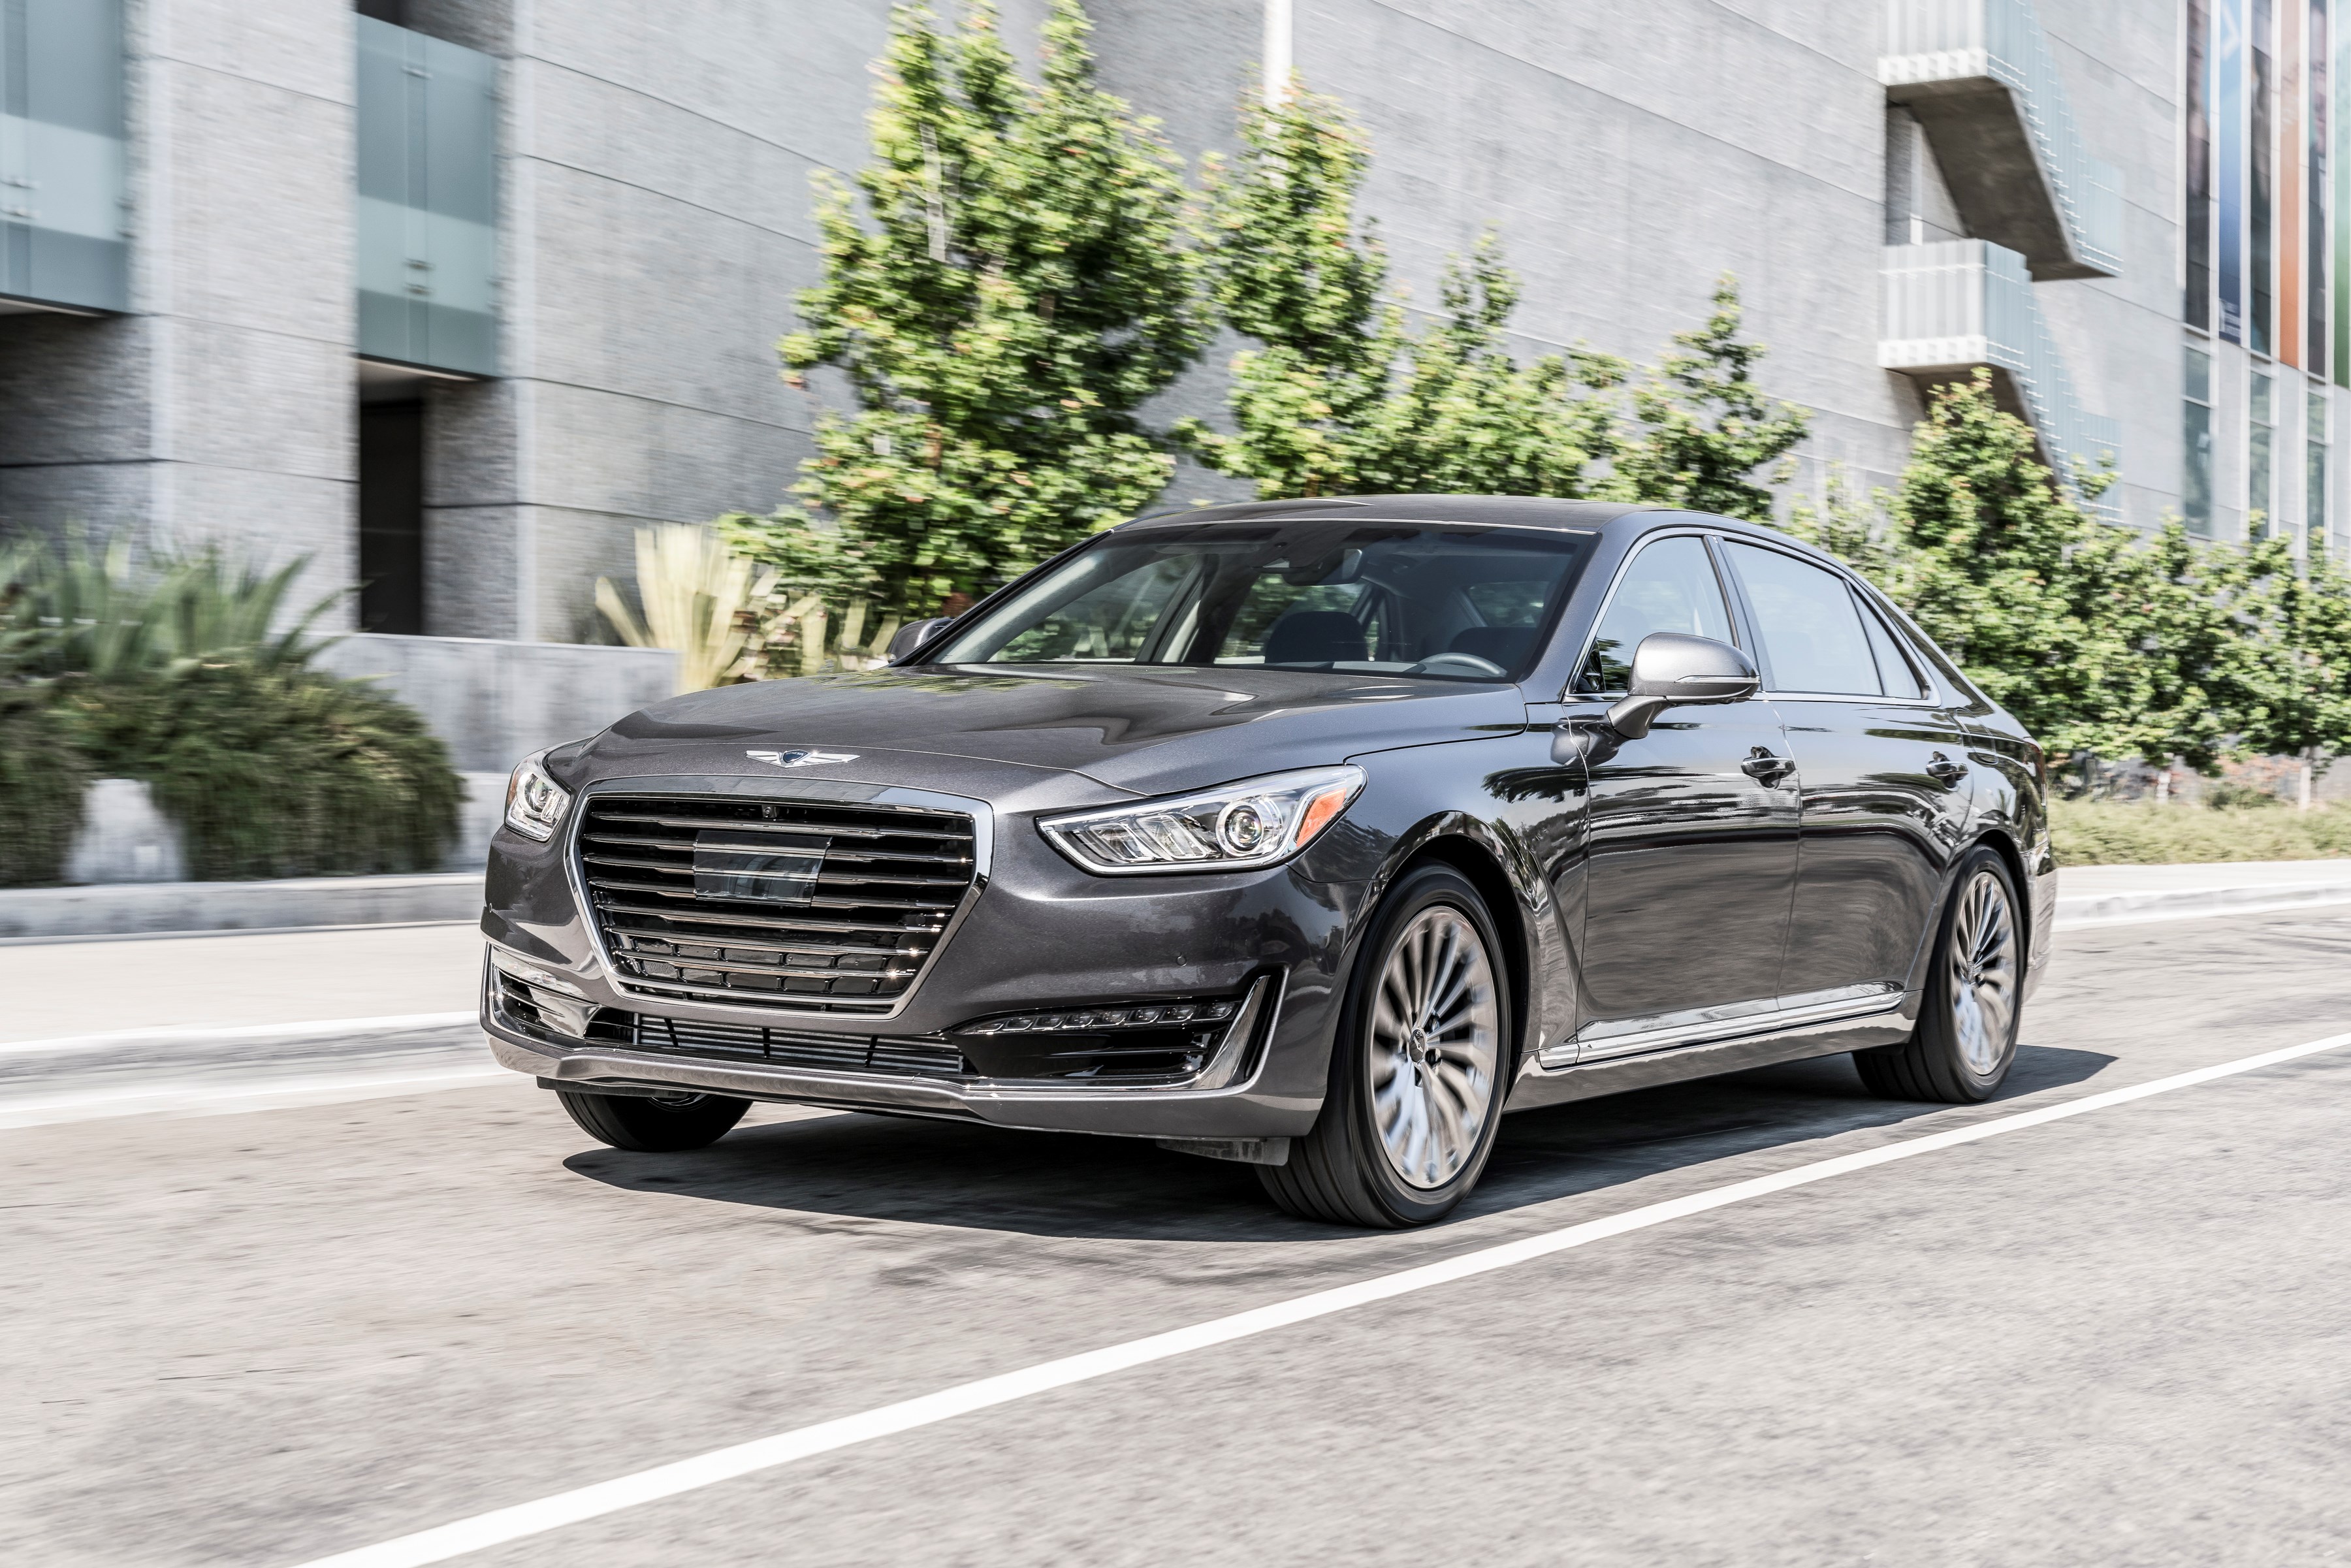 The G90's front bumper is sleek and stylish.